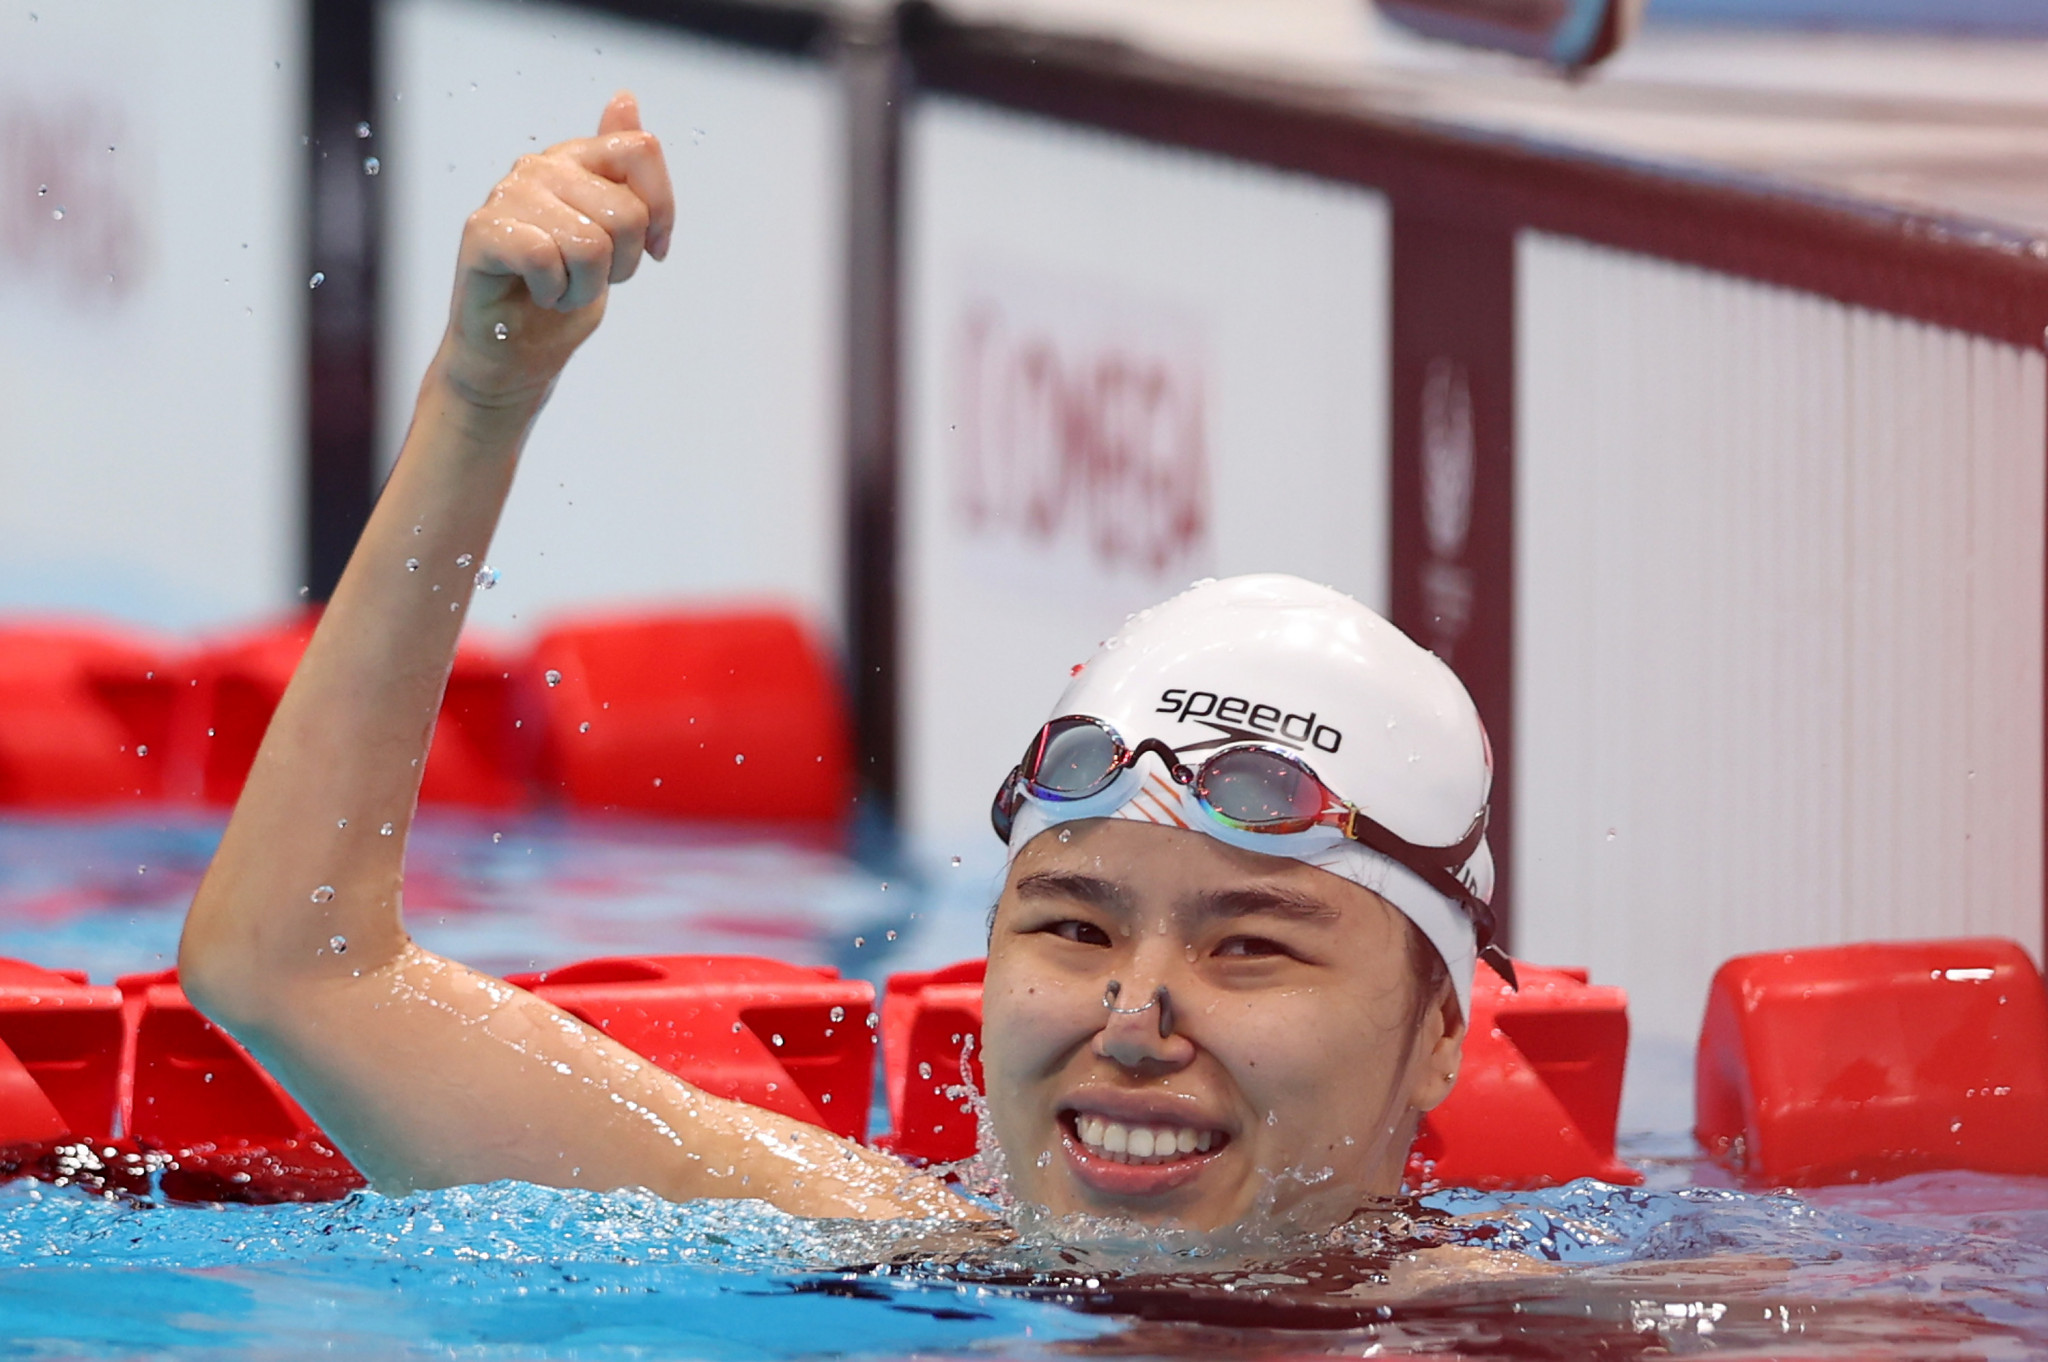 Yip Pin Xiu won two gold medals at the Tokyo 2020 Paralympics ©Getty Images